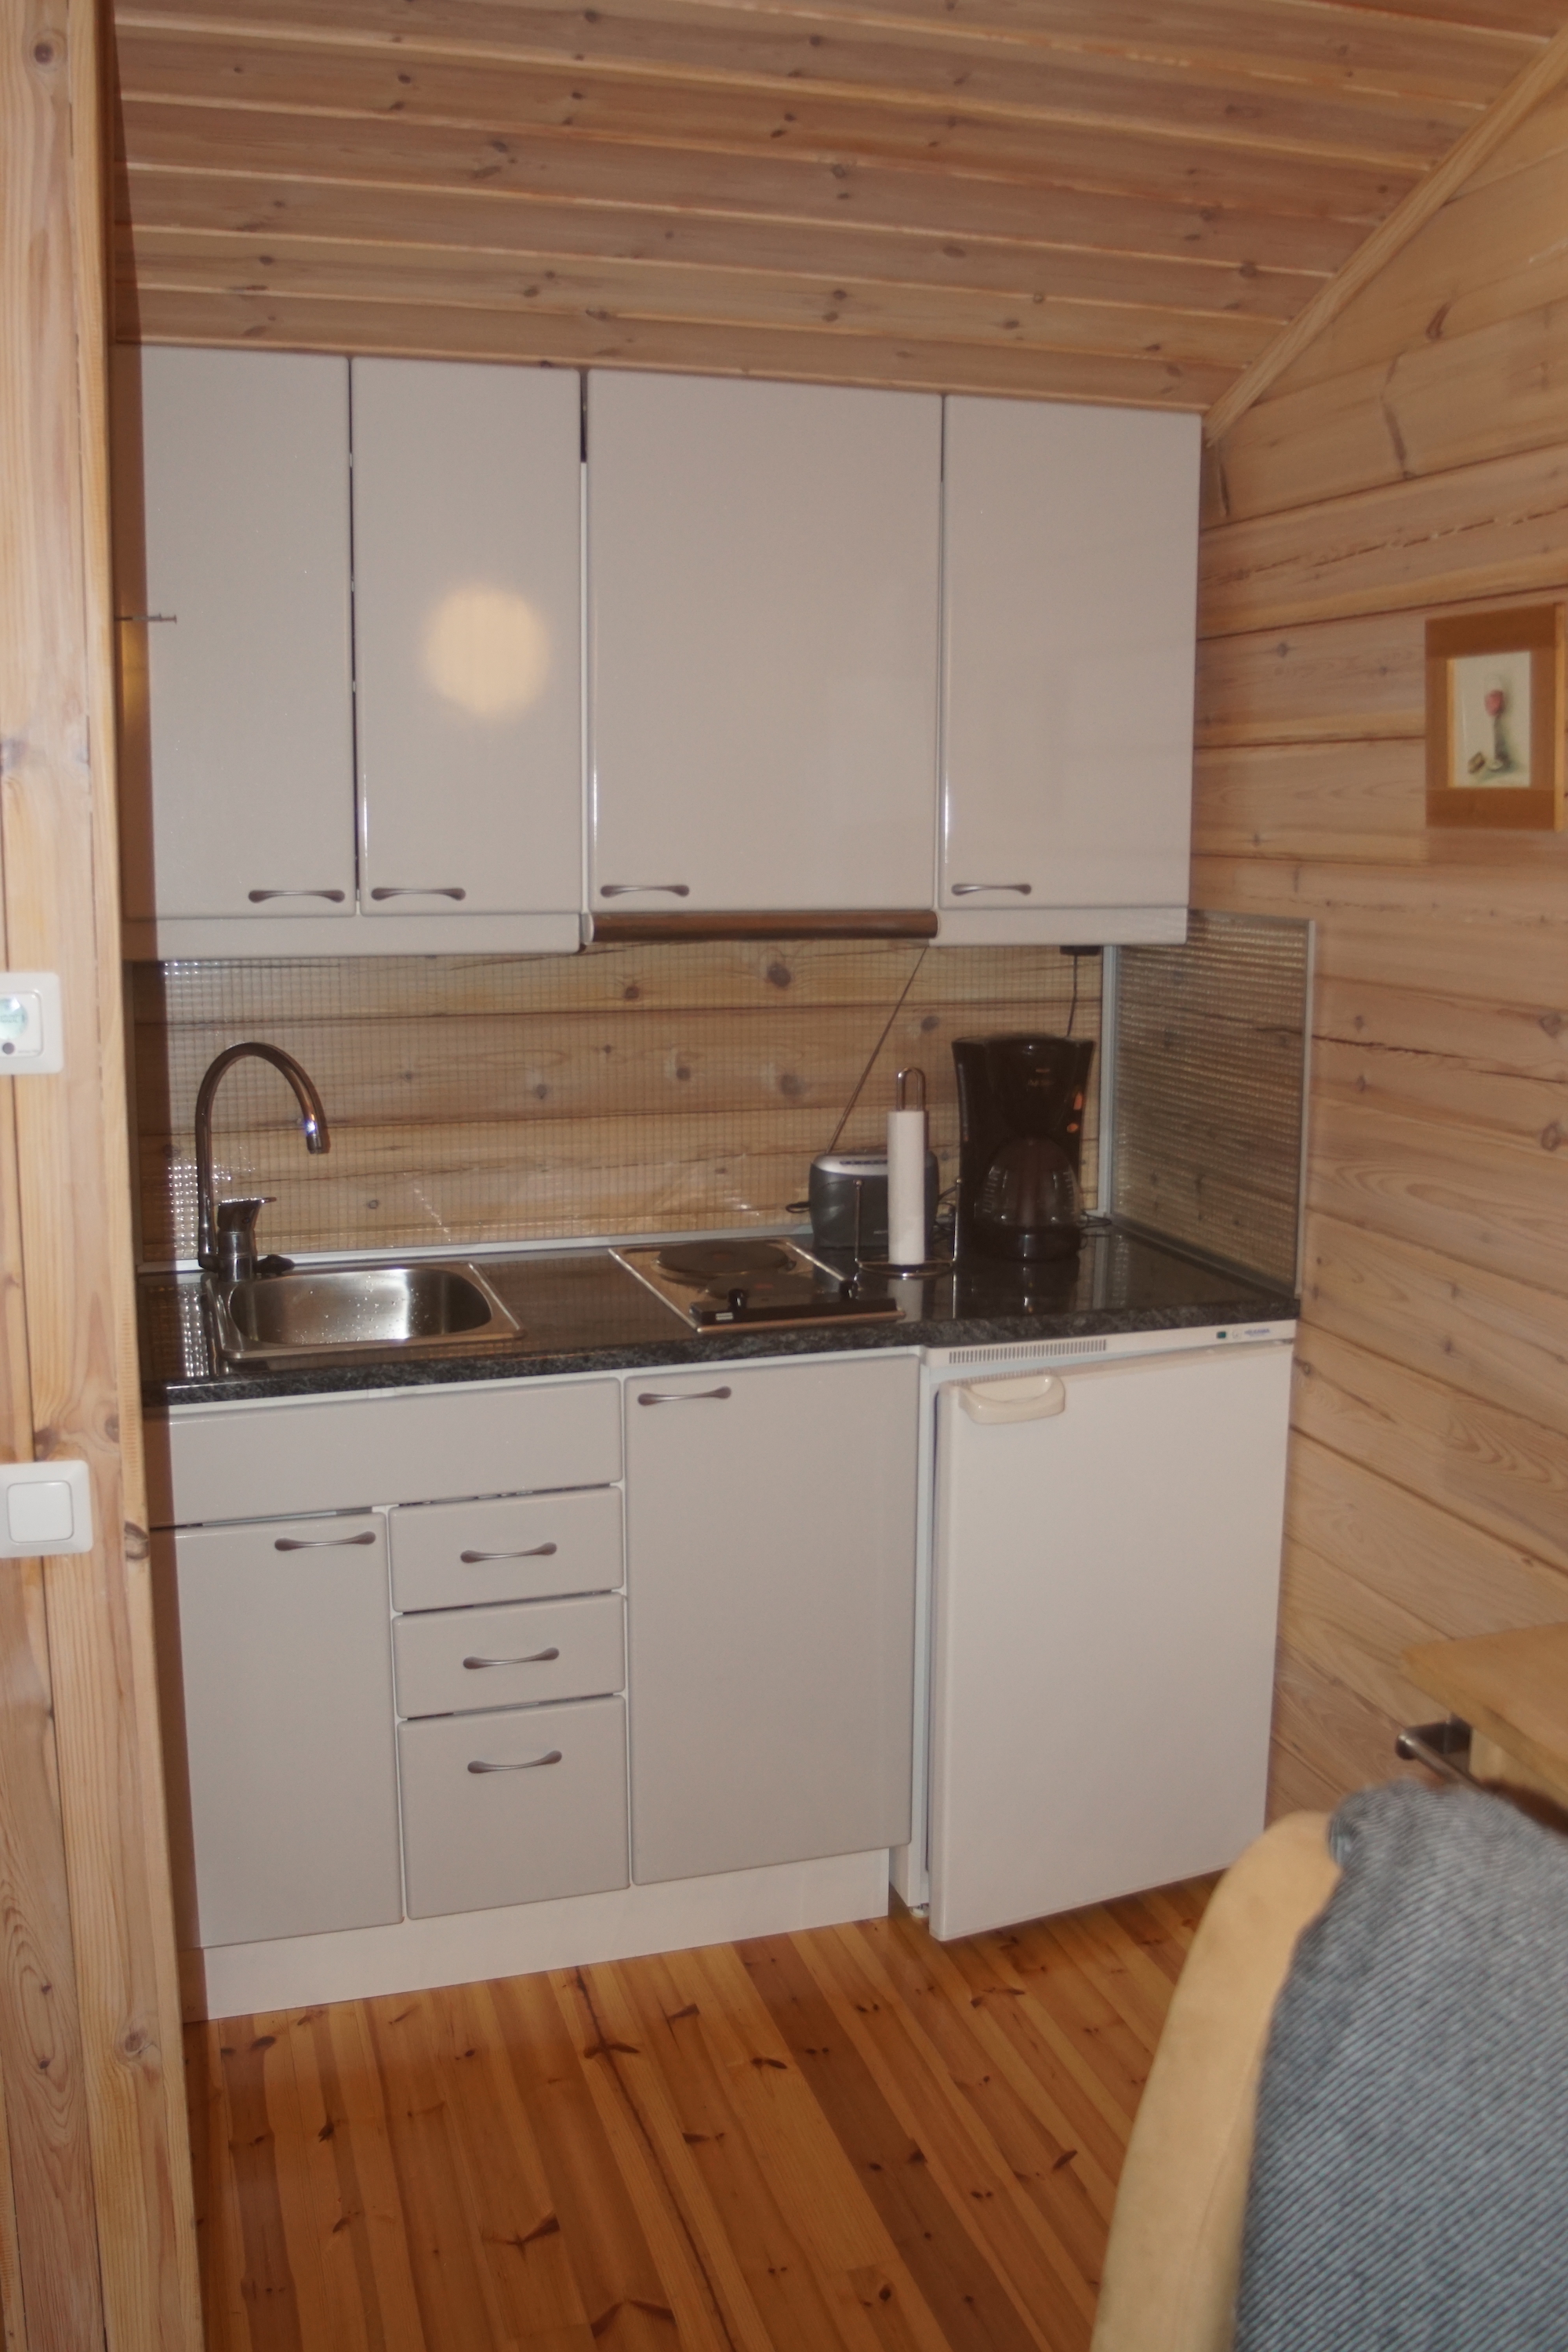 Kitchenette in the lakeside sauna building